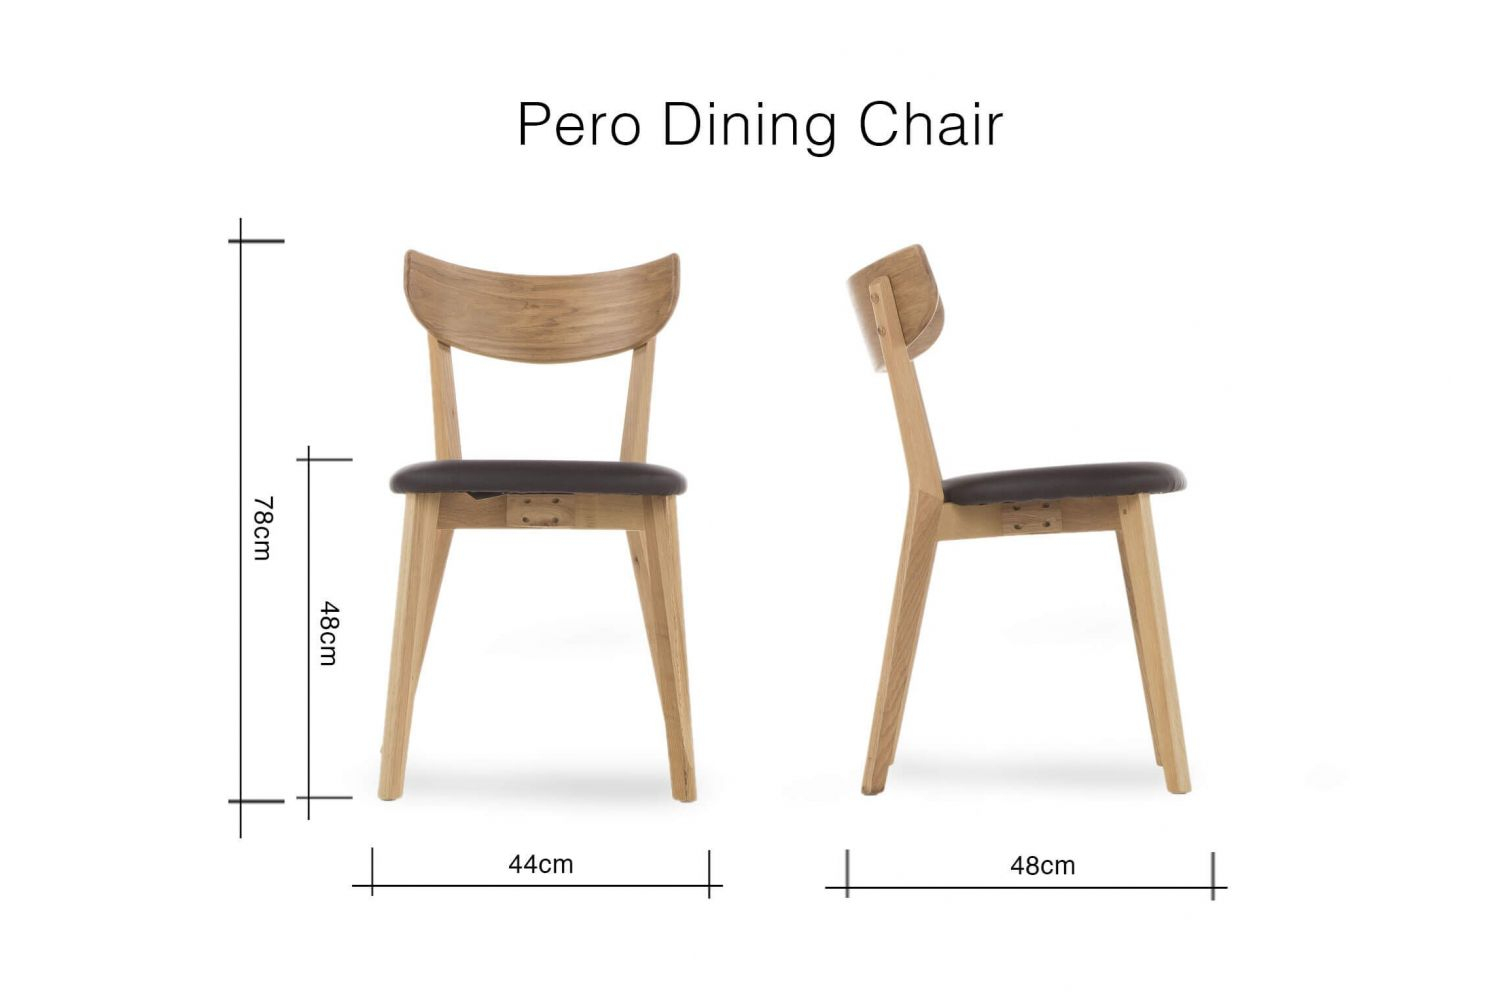 Oak Dining Chair With Black Faux Leather Seat - Pero - Ez encequiconcerne Ez Living Dining Chairs